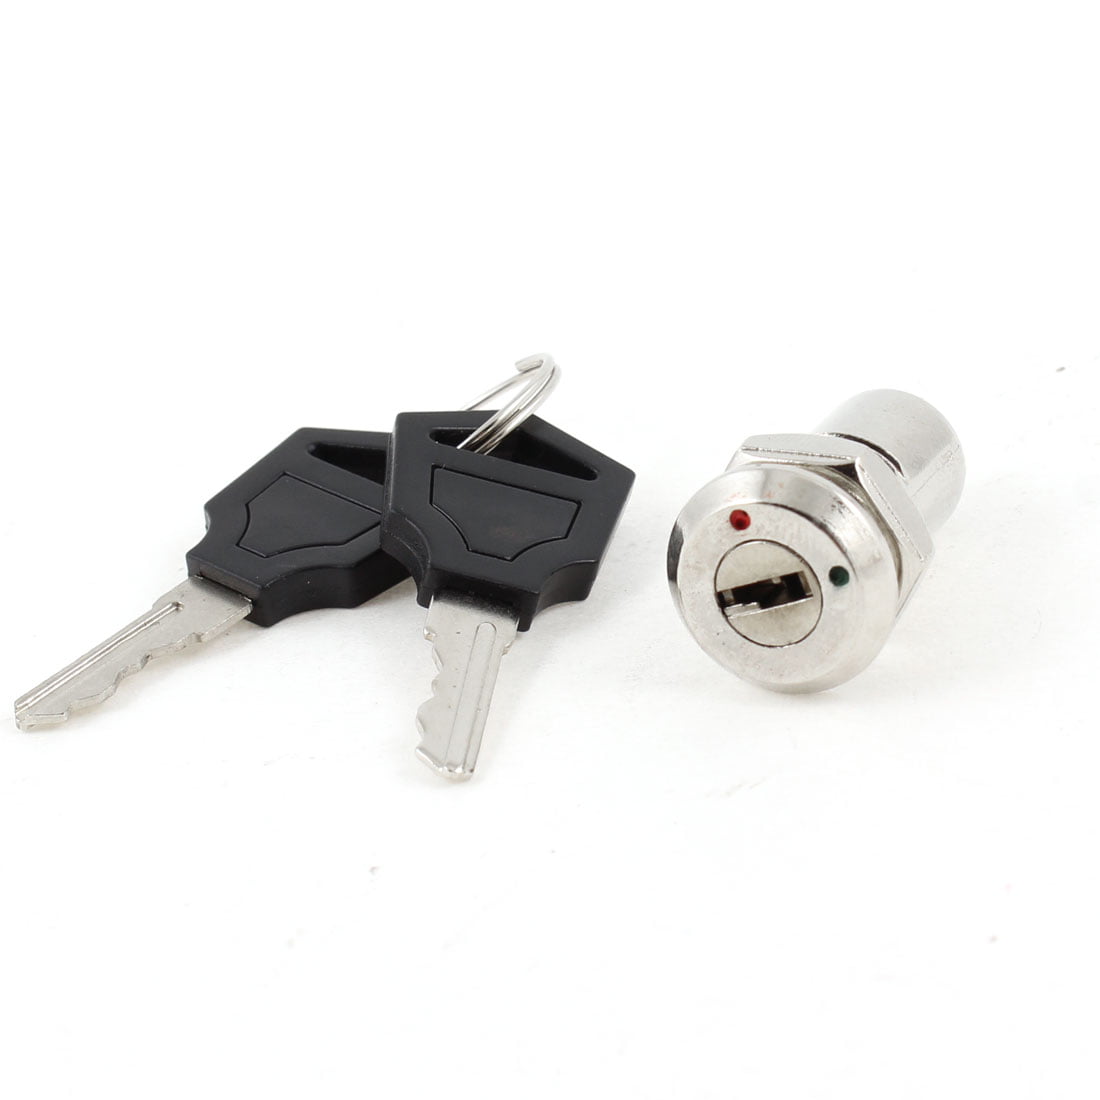 WALL KEY ON OFF LOCK SWITCH HOME 110/125V ELECTRICAL TOGGLE LOCKOUT OUTLET COVER 